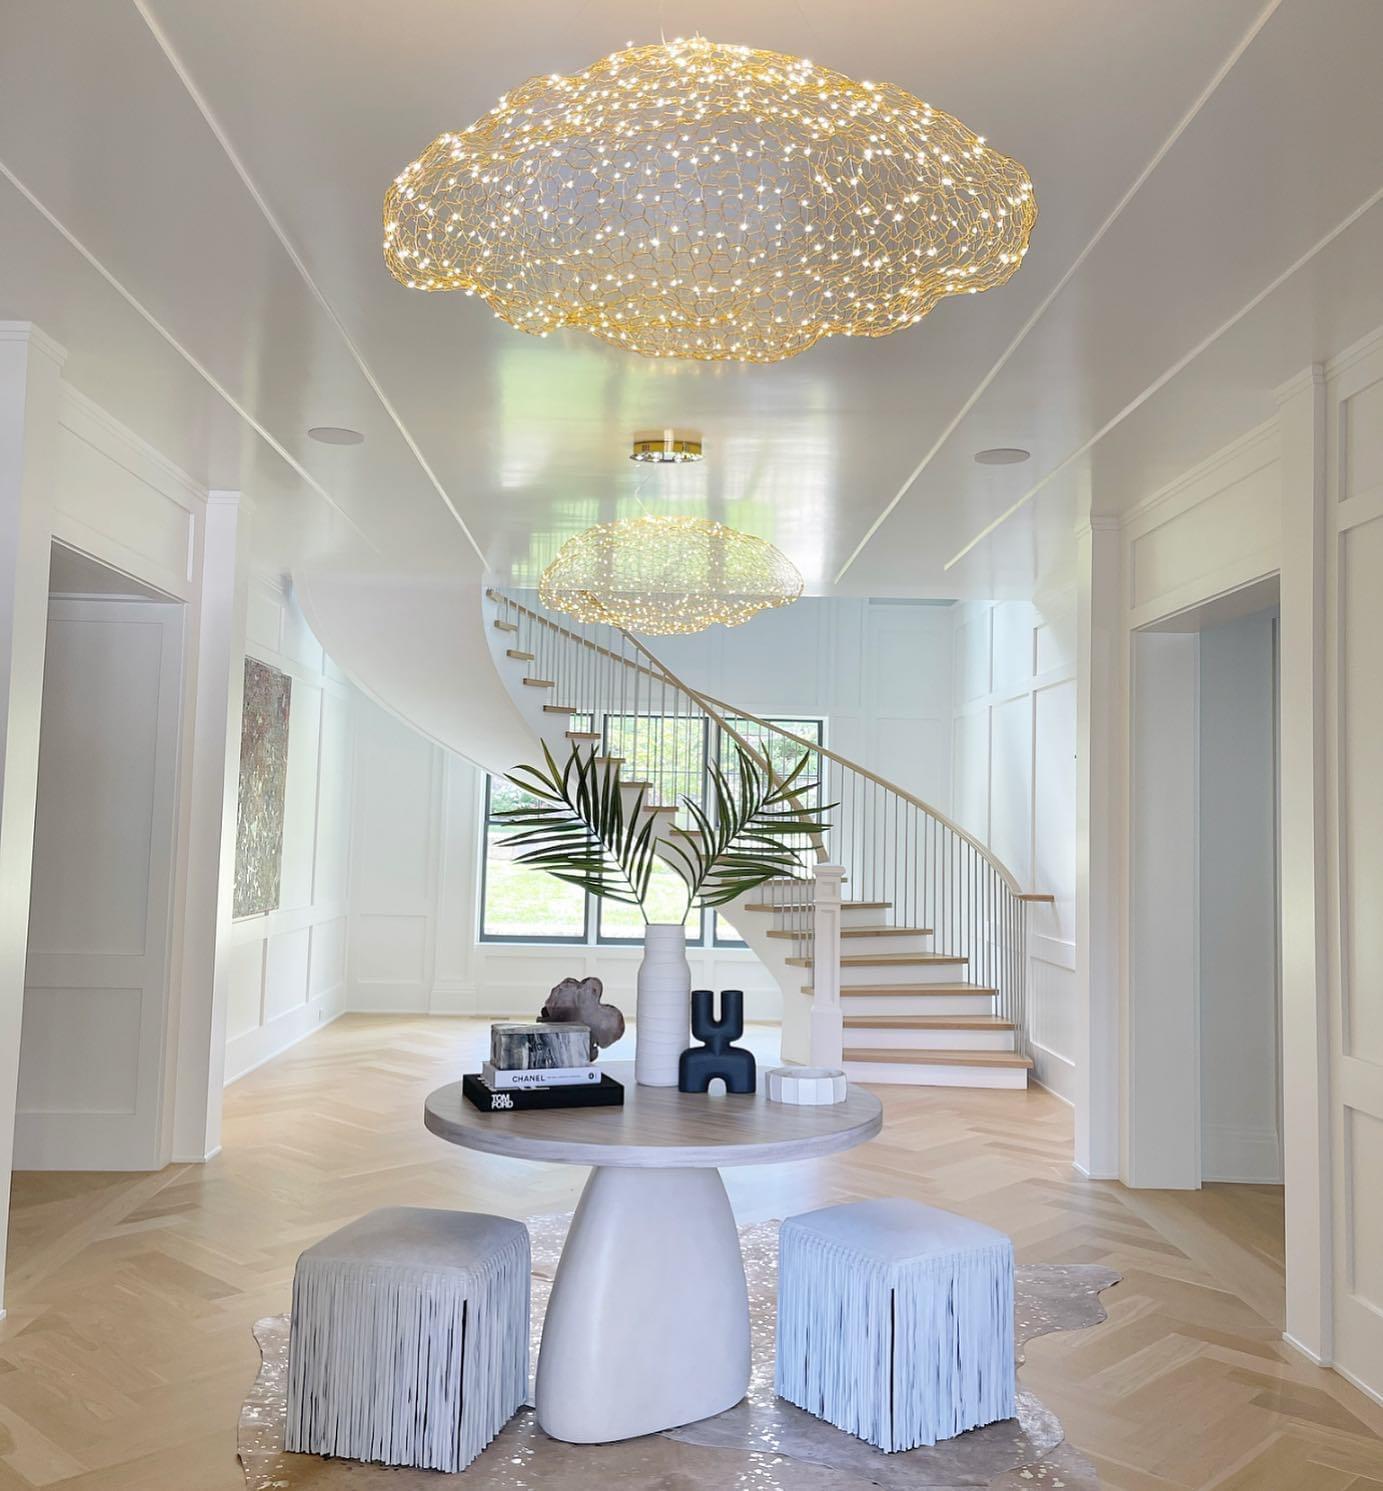 In the LED cloud Light, hundreds of small LED lights are combined to a handmade  wire mesh to create an elegant floating cloud chandelier light or pendant.
Six LED lights are mounted on the canopy.
Dimmable. Three standard sizes.
Finishes: Gold or